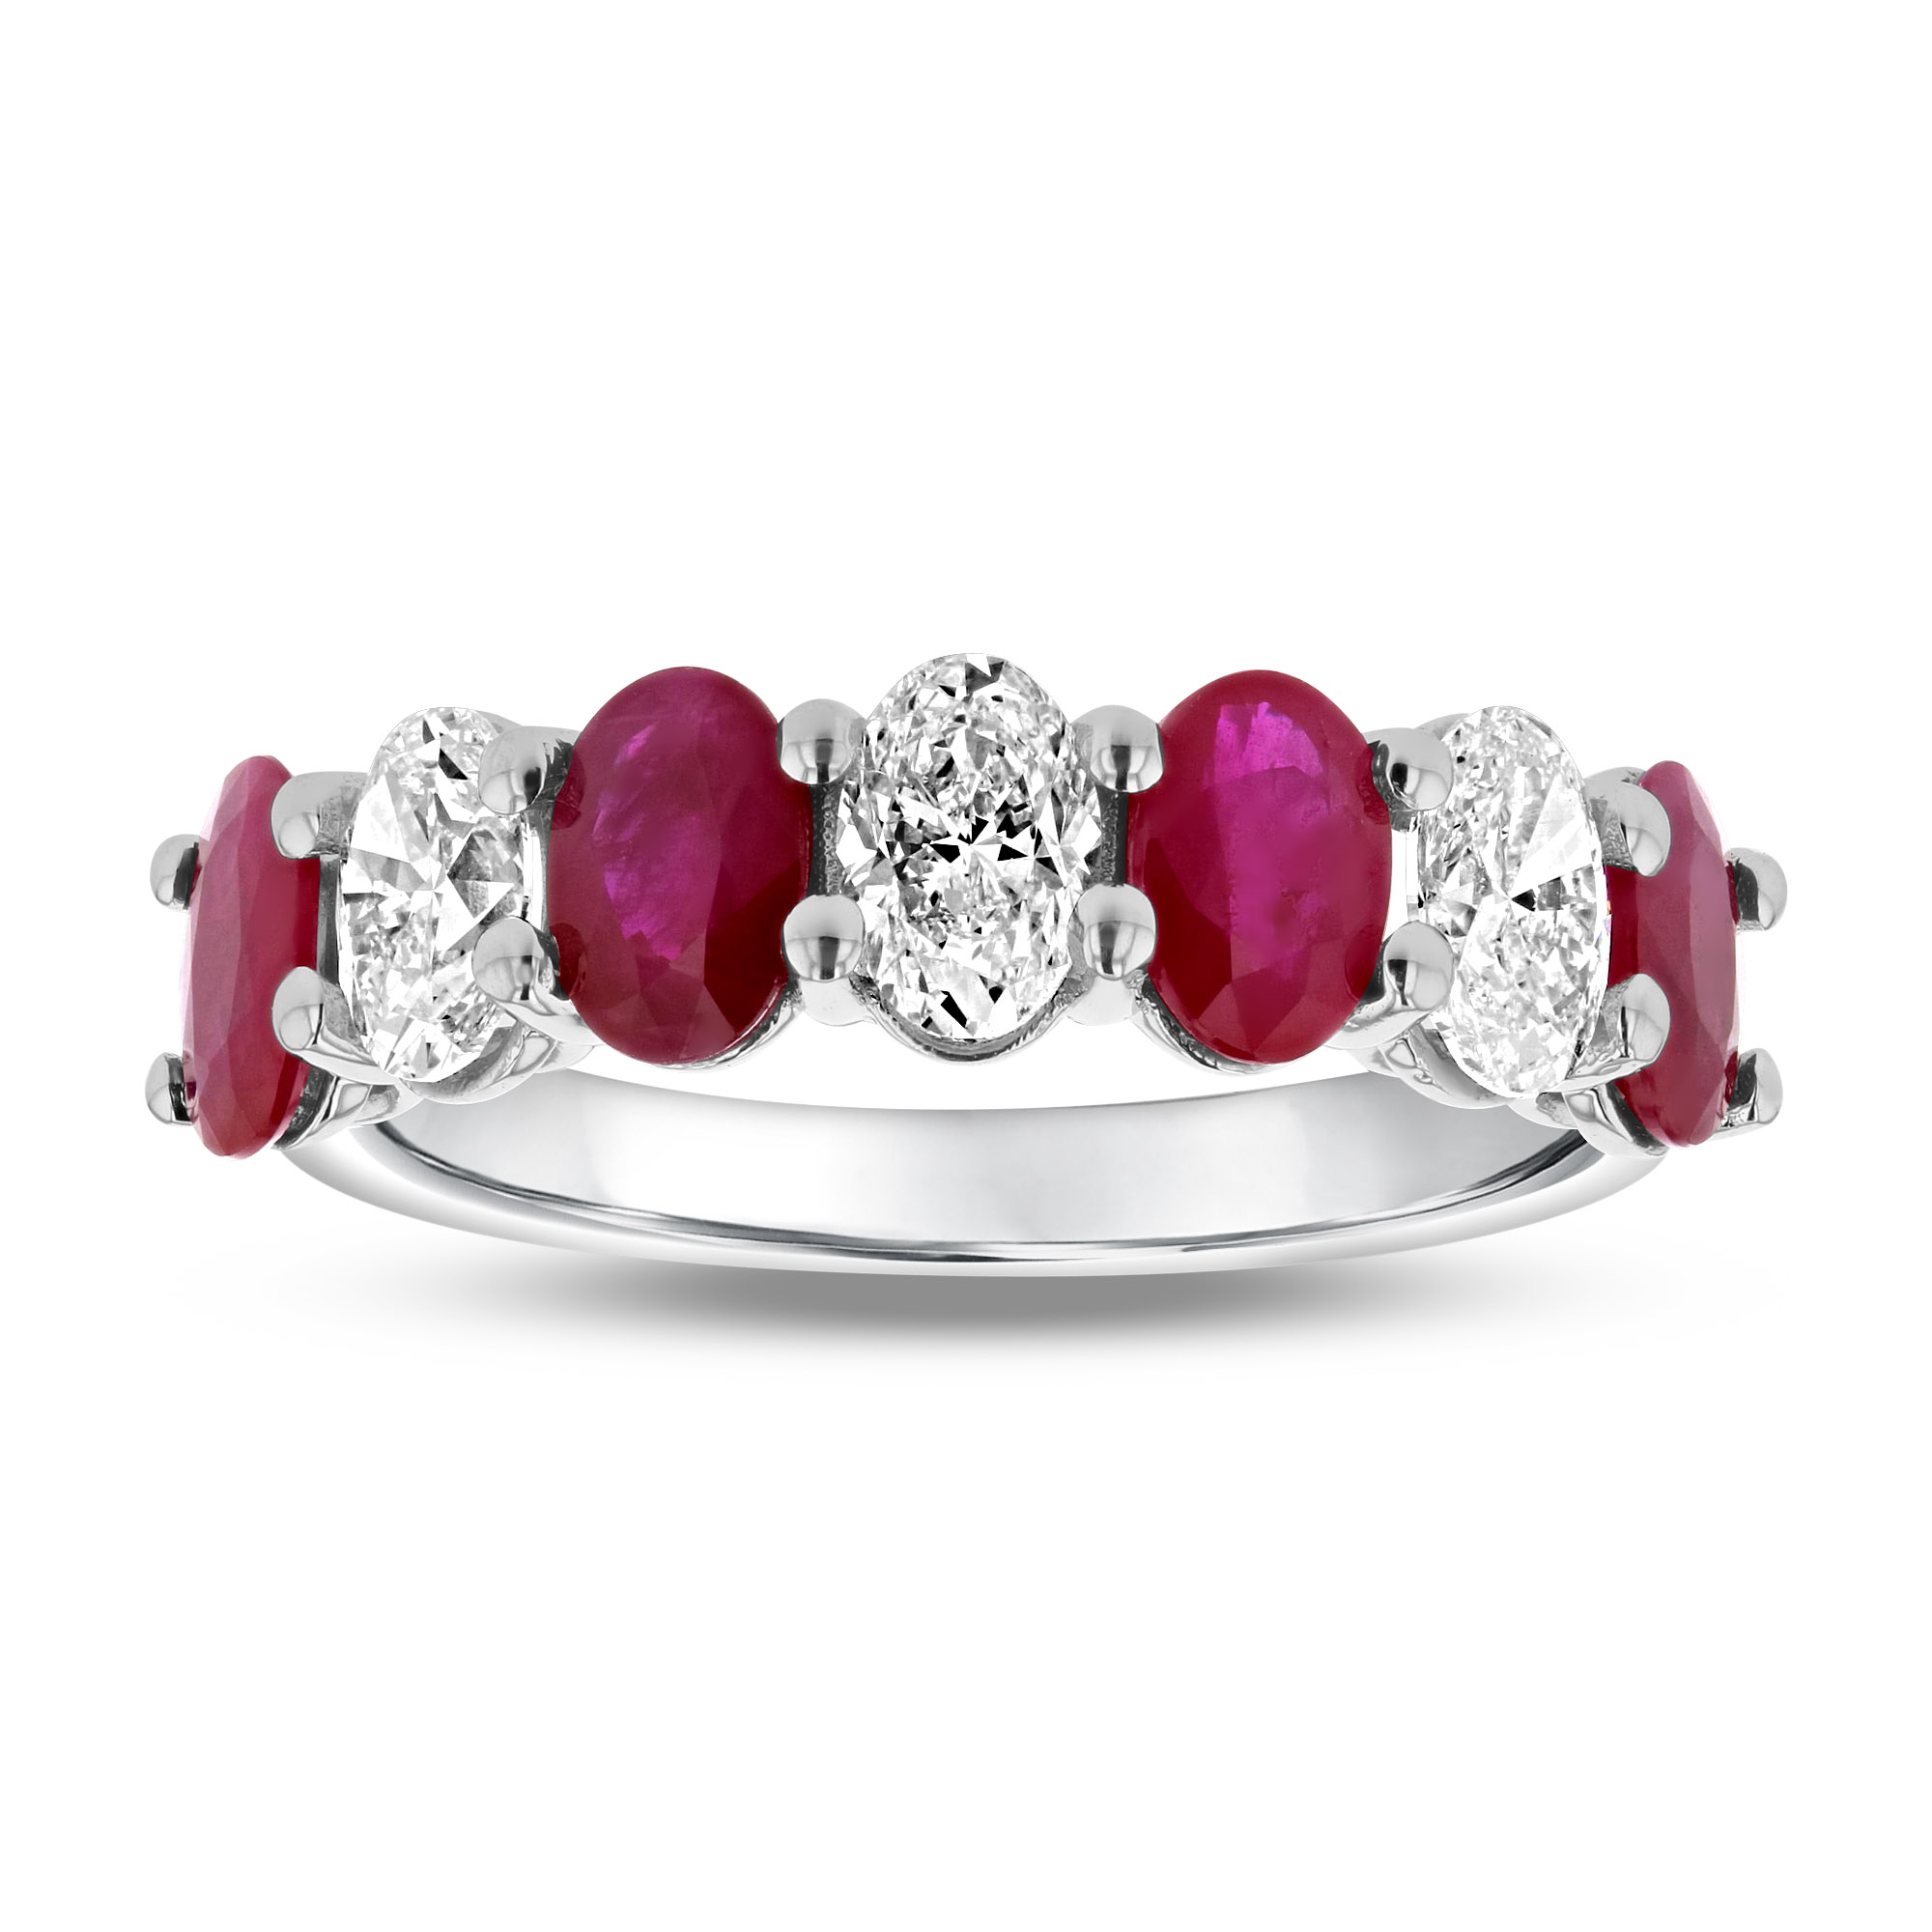 View 1.20ctw Diamond and Ruby Band in 14k White Gold 